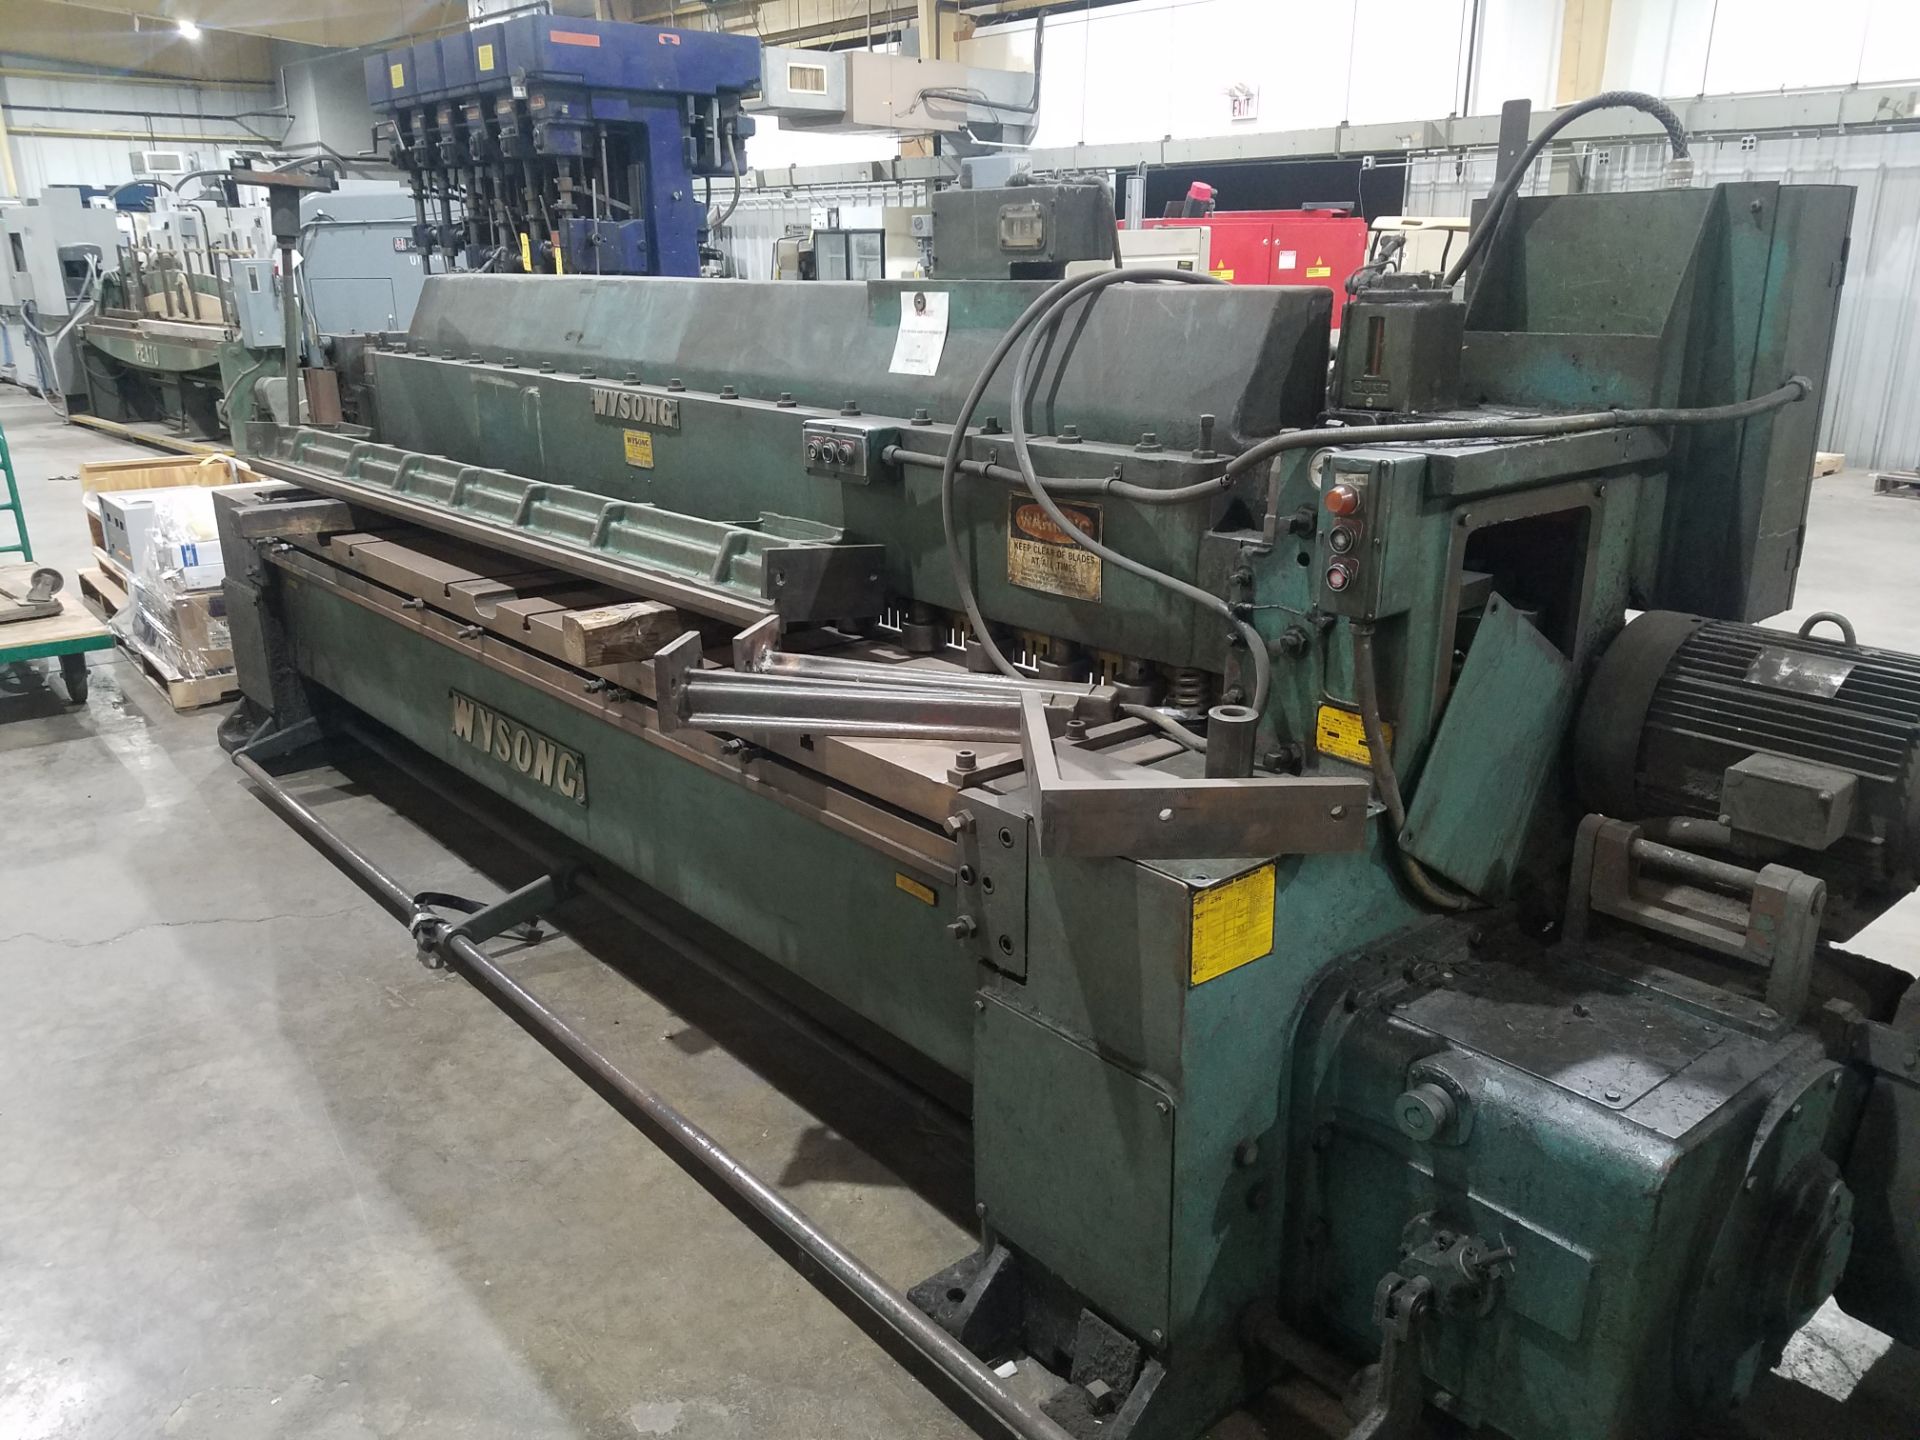 Wysong Model 1025 Power Squaring Shear, s/n P37-377, 10' X 1/4", 10' Squaring Arm, 36" Front - Image 2 of 25